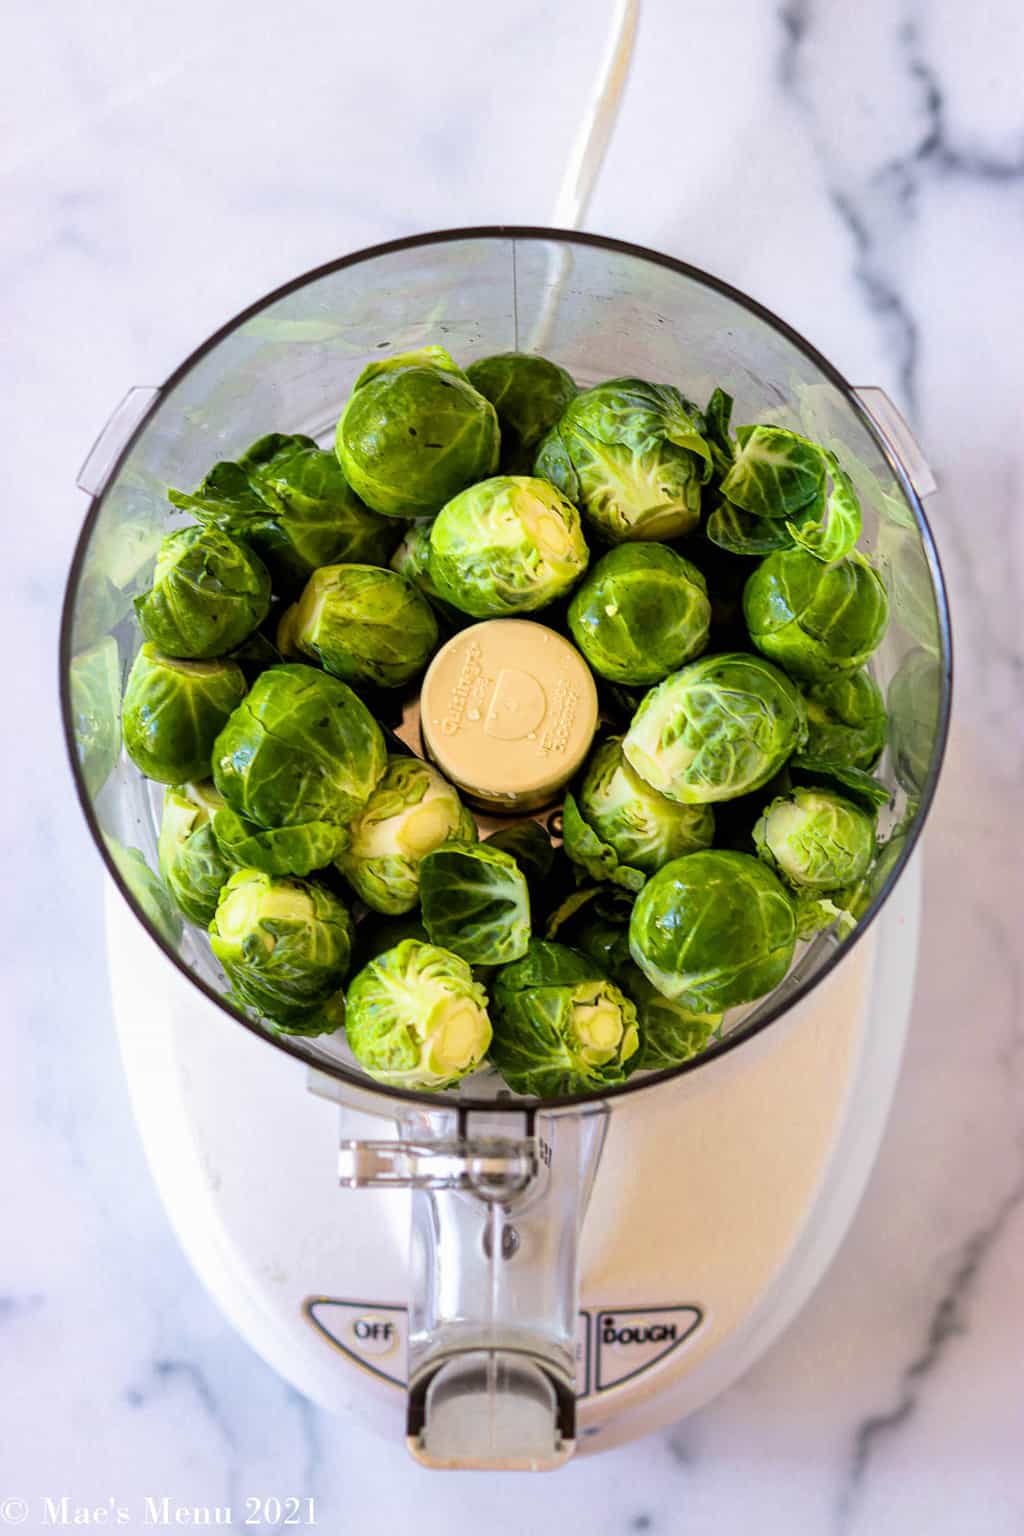 An overhead shot of a food processor with brussels sprouts